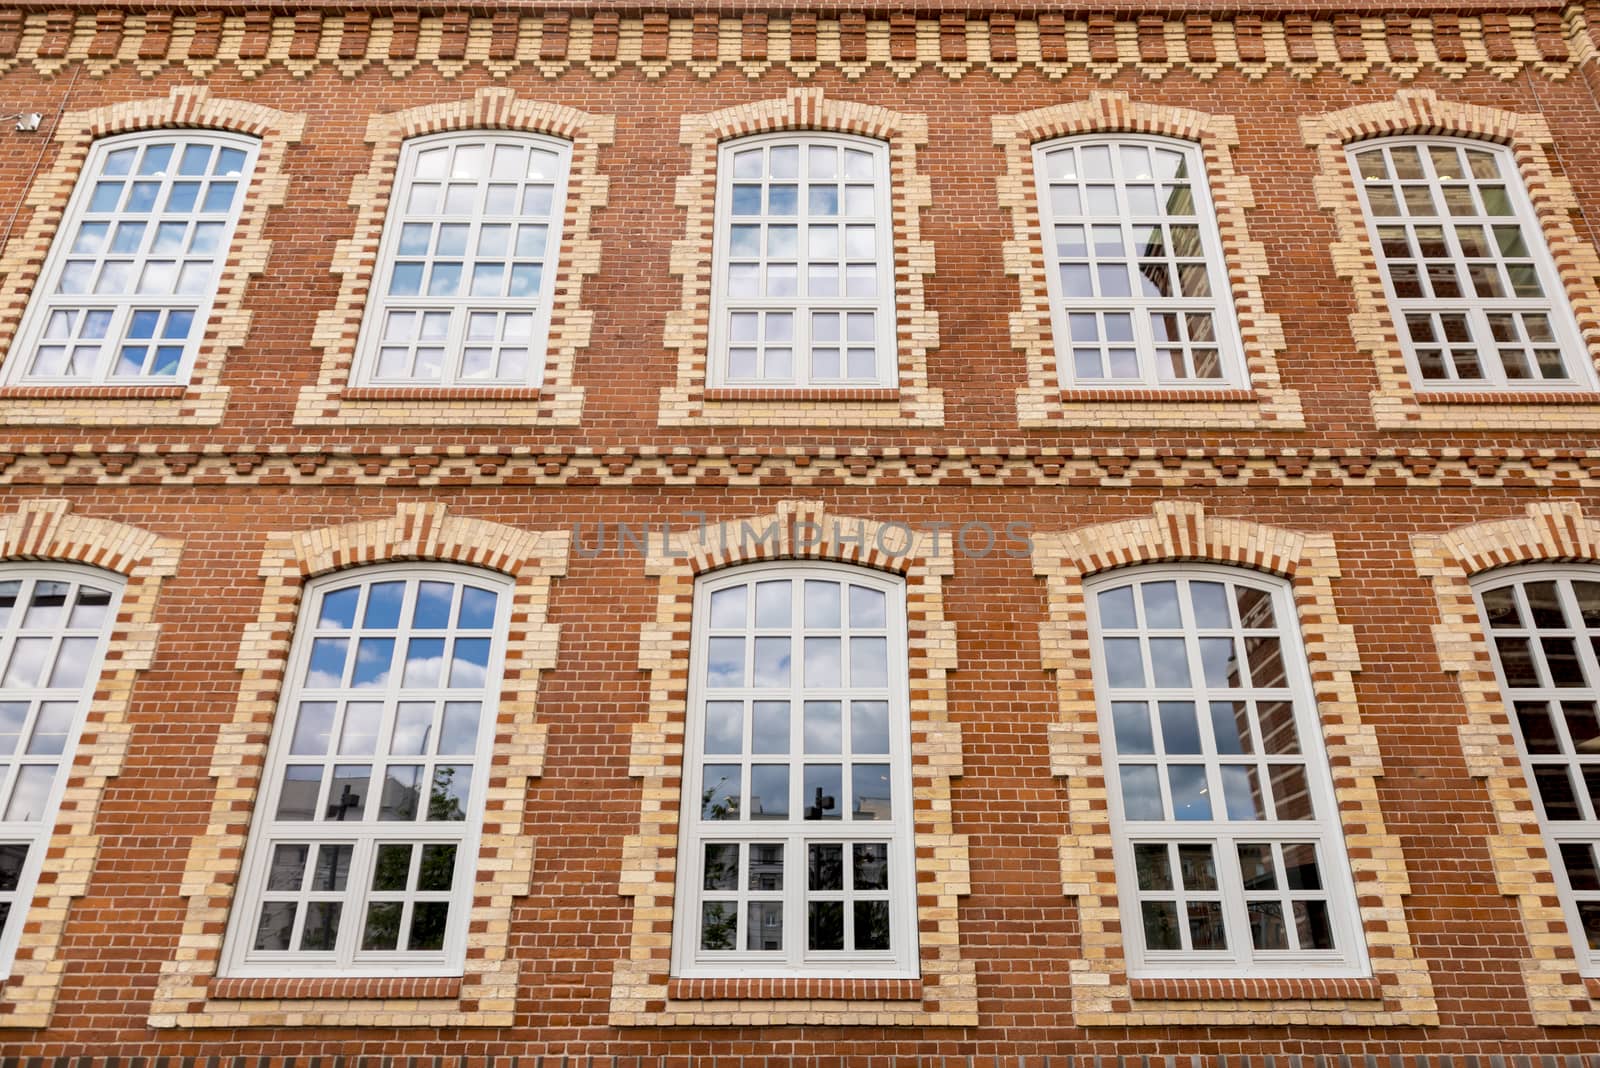 Facade of an old office building of red brick